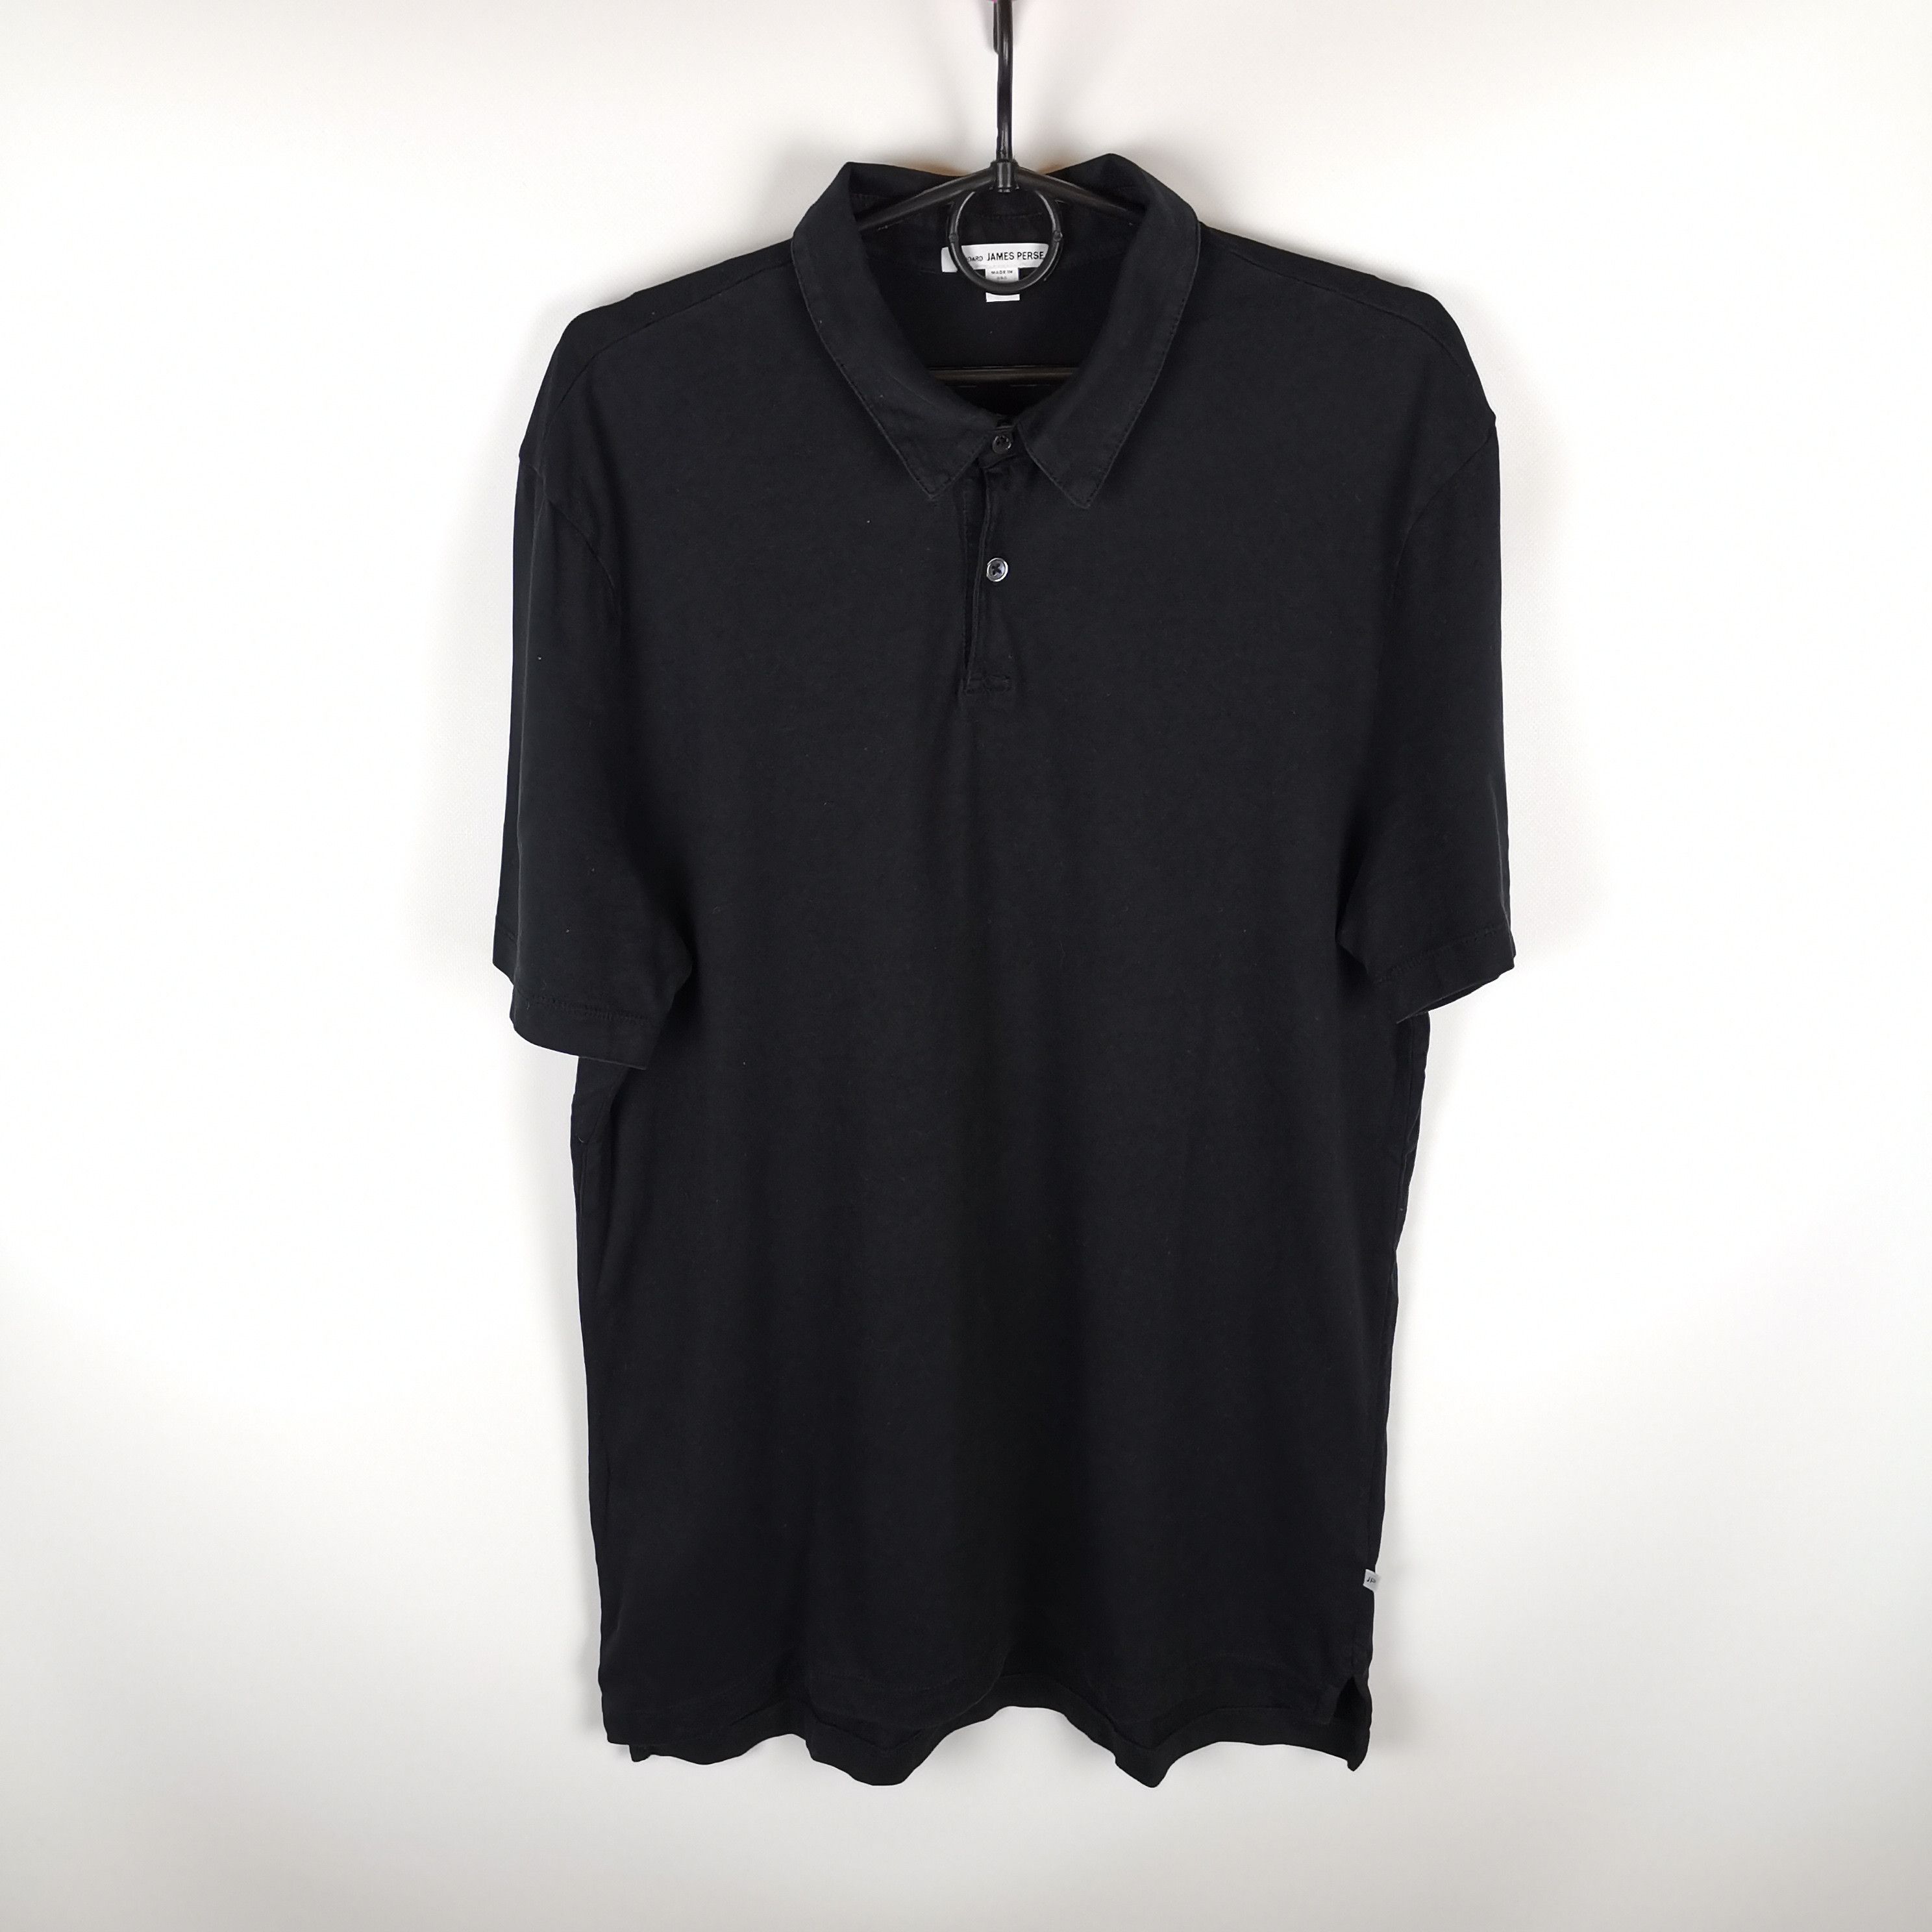 James Perse Standard James Perse classic basic blank black polo shirt ...